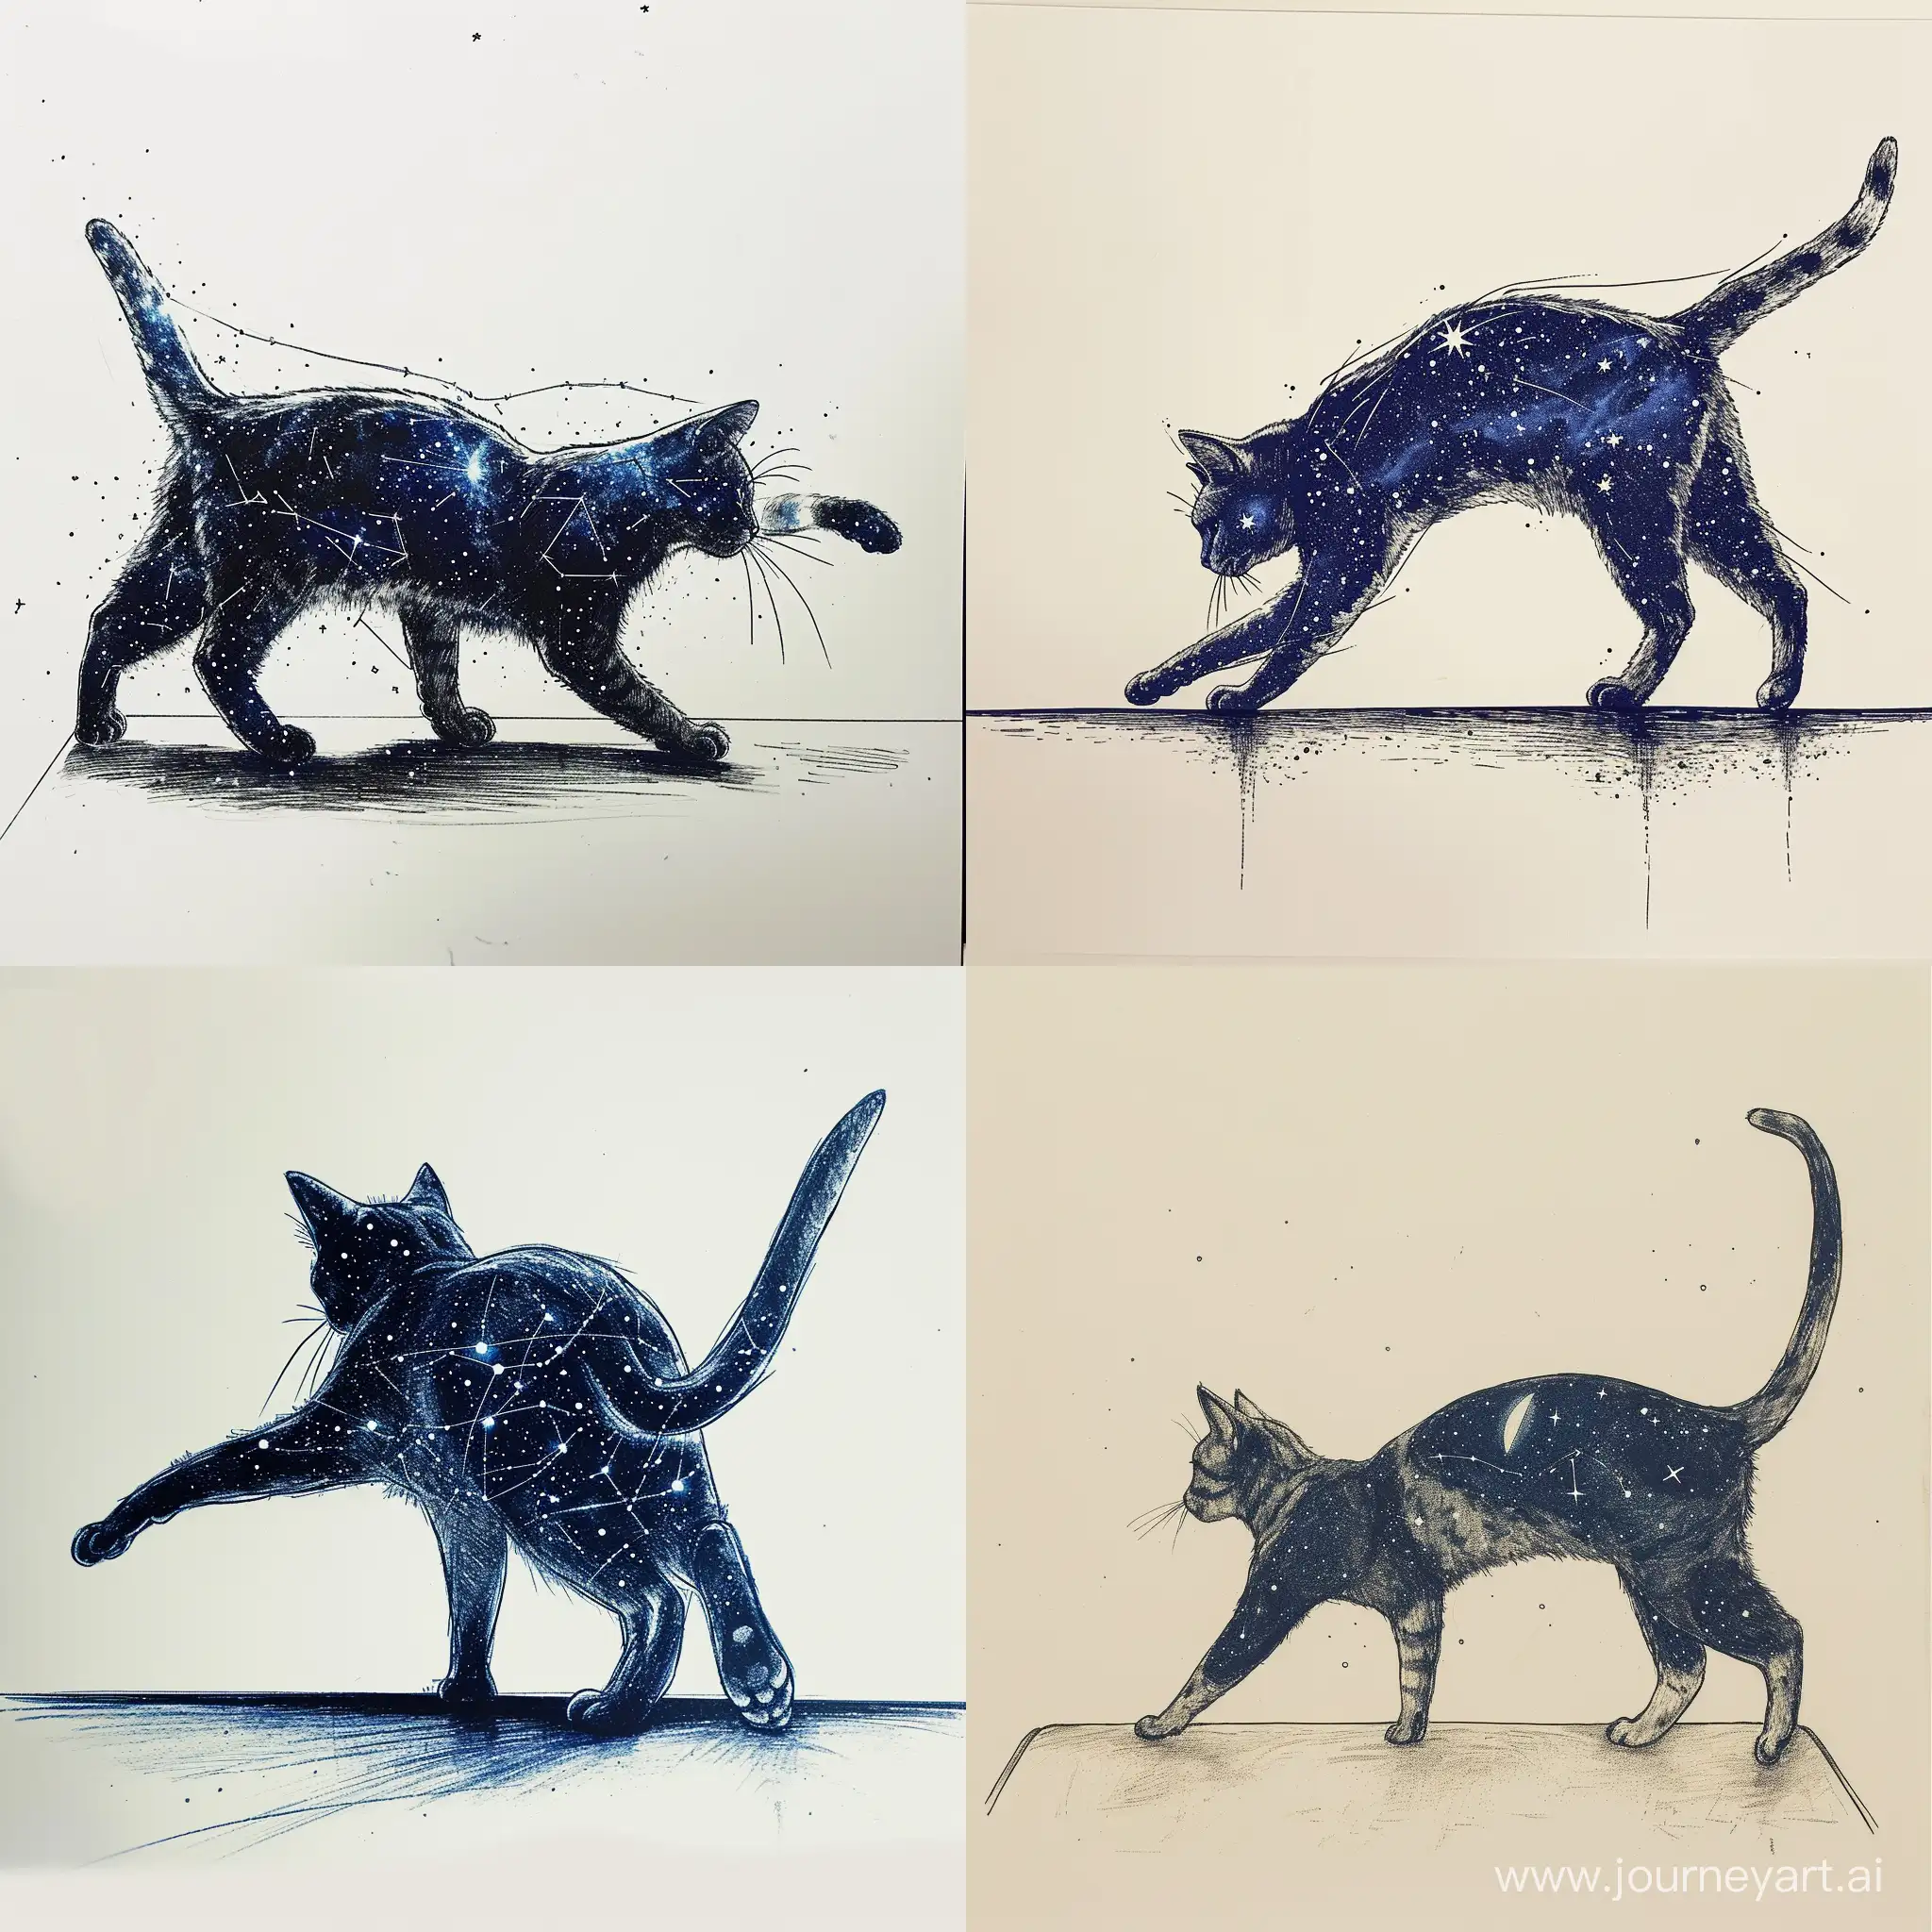 A cat is walking on the table. The viewer sees the cat from behind, the back view. The cat has stretched its front paw towards something. The cat has space dark blue coloring with stars inside the cat. The picture itself is white. The drawing is made in the style of a primitive sketch for a children’s picture, but carefully and without losing quality.